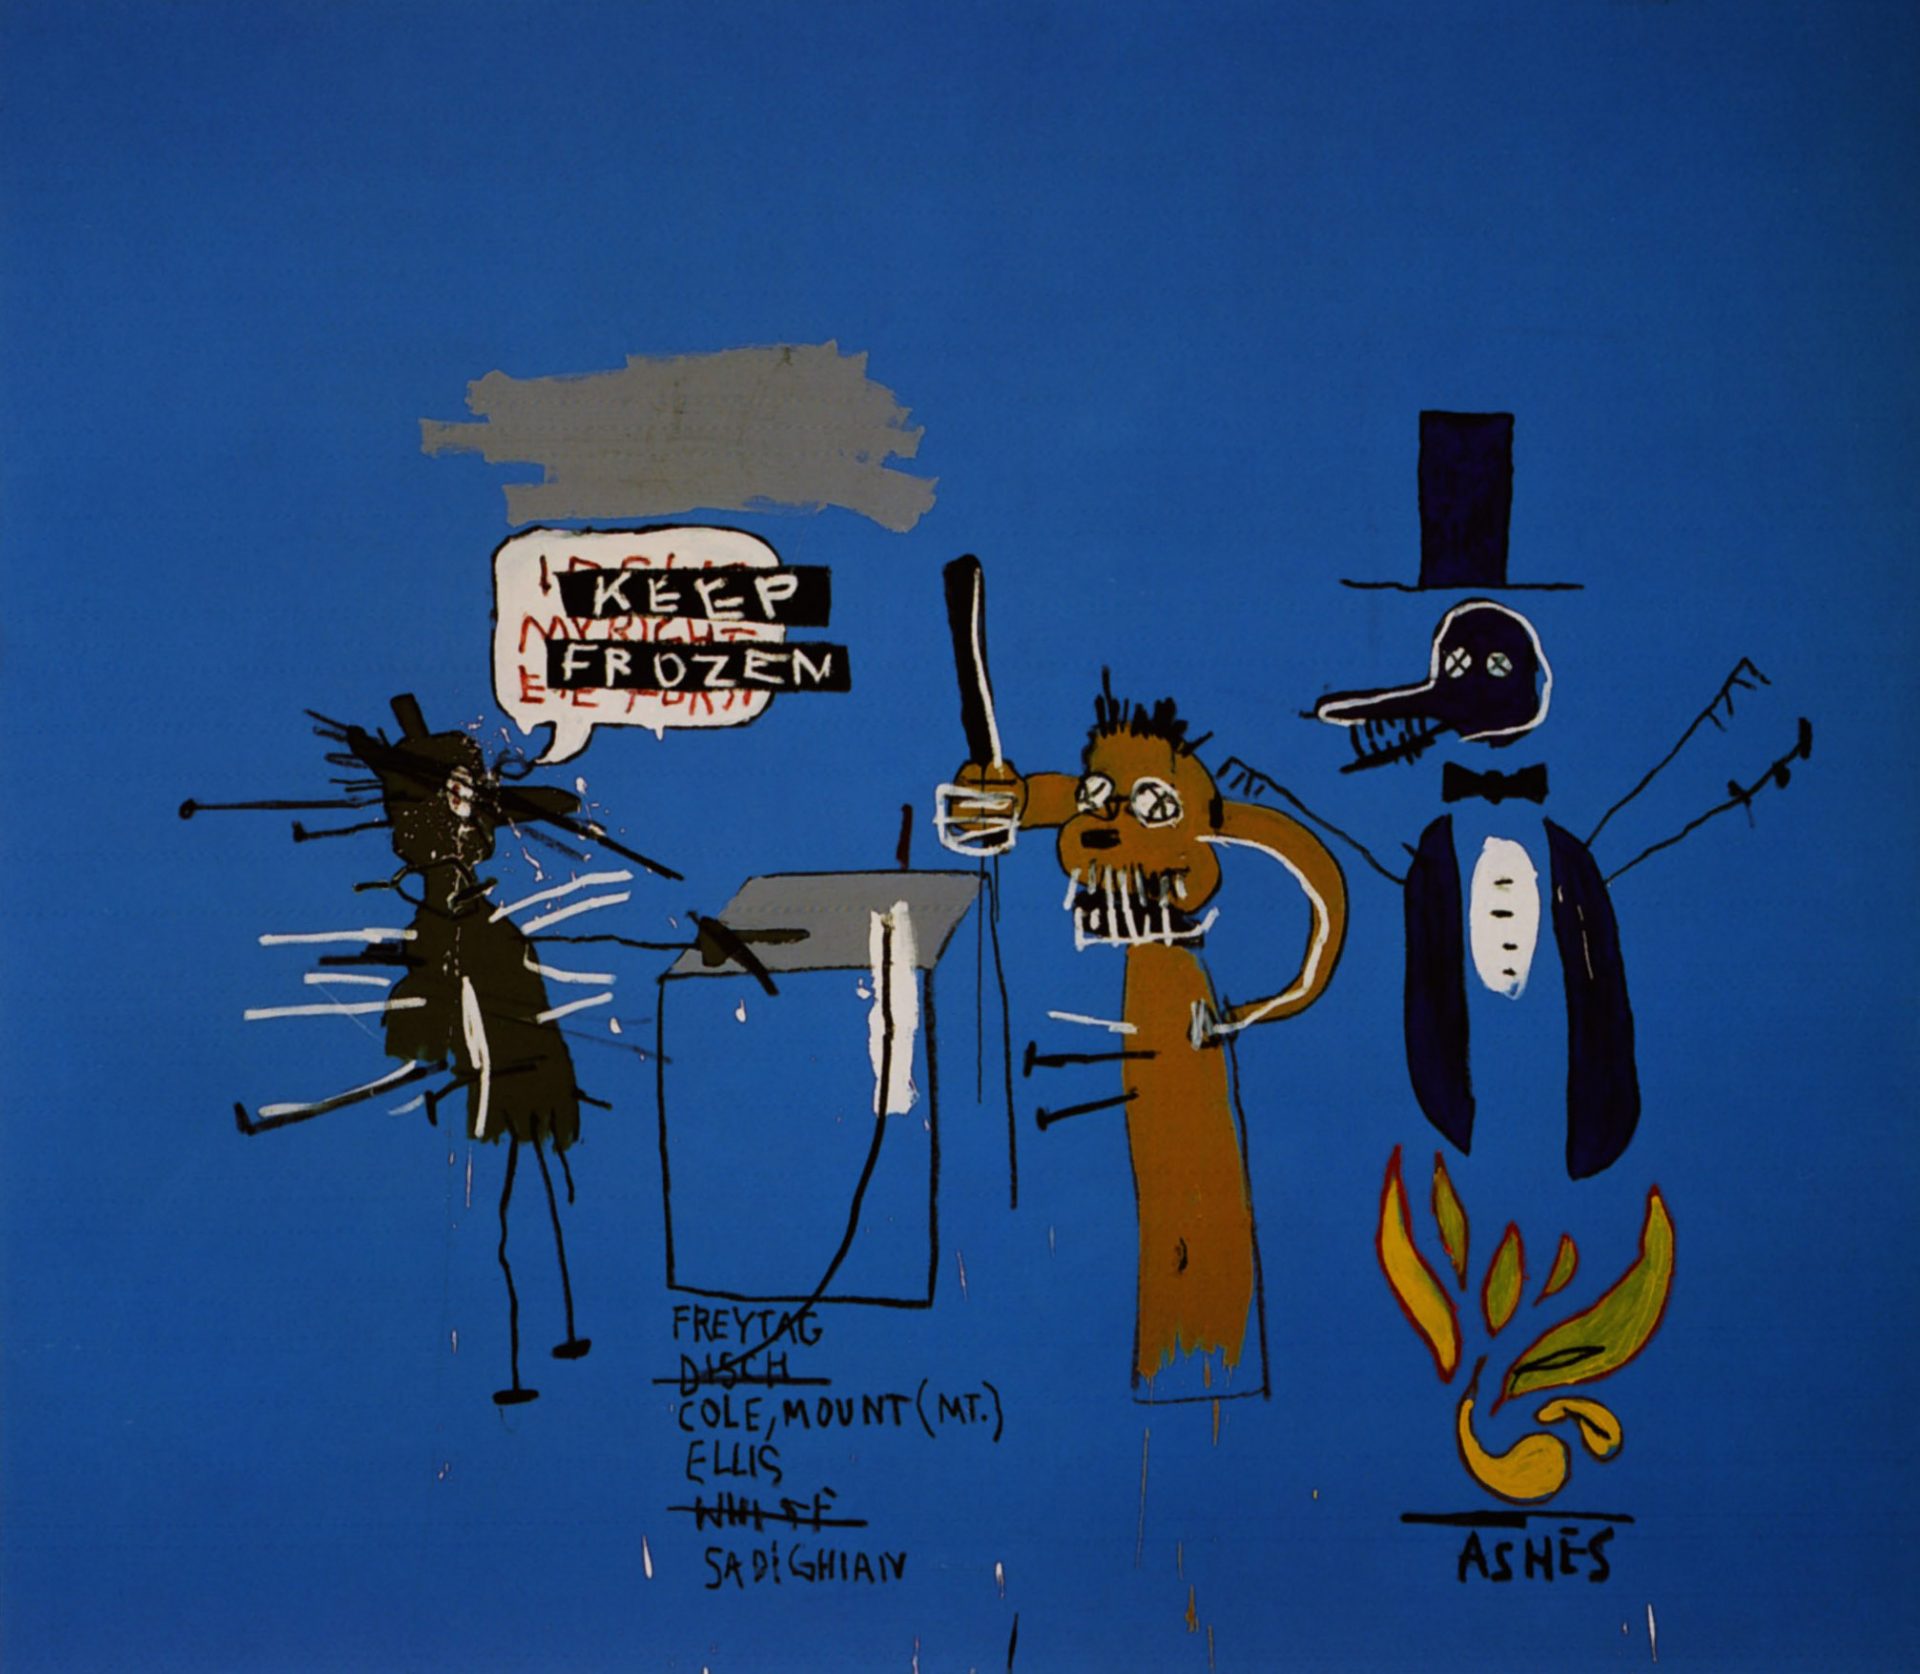 Three vibrant, abstract dingoes stand against a cerulean blue background in Jean-Michel Basquiat's 1988 work “The Dingoes That Park Their Brains With Their Gum”. Their bold forms seem to float, suggesting the power and intensity of Basquiat's street art origins.